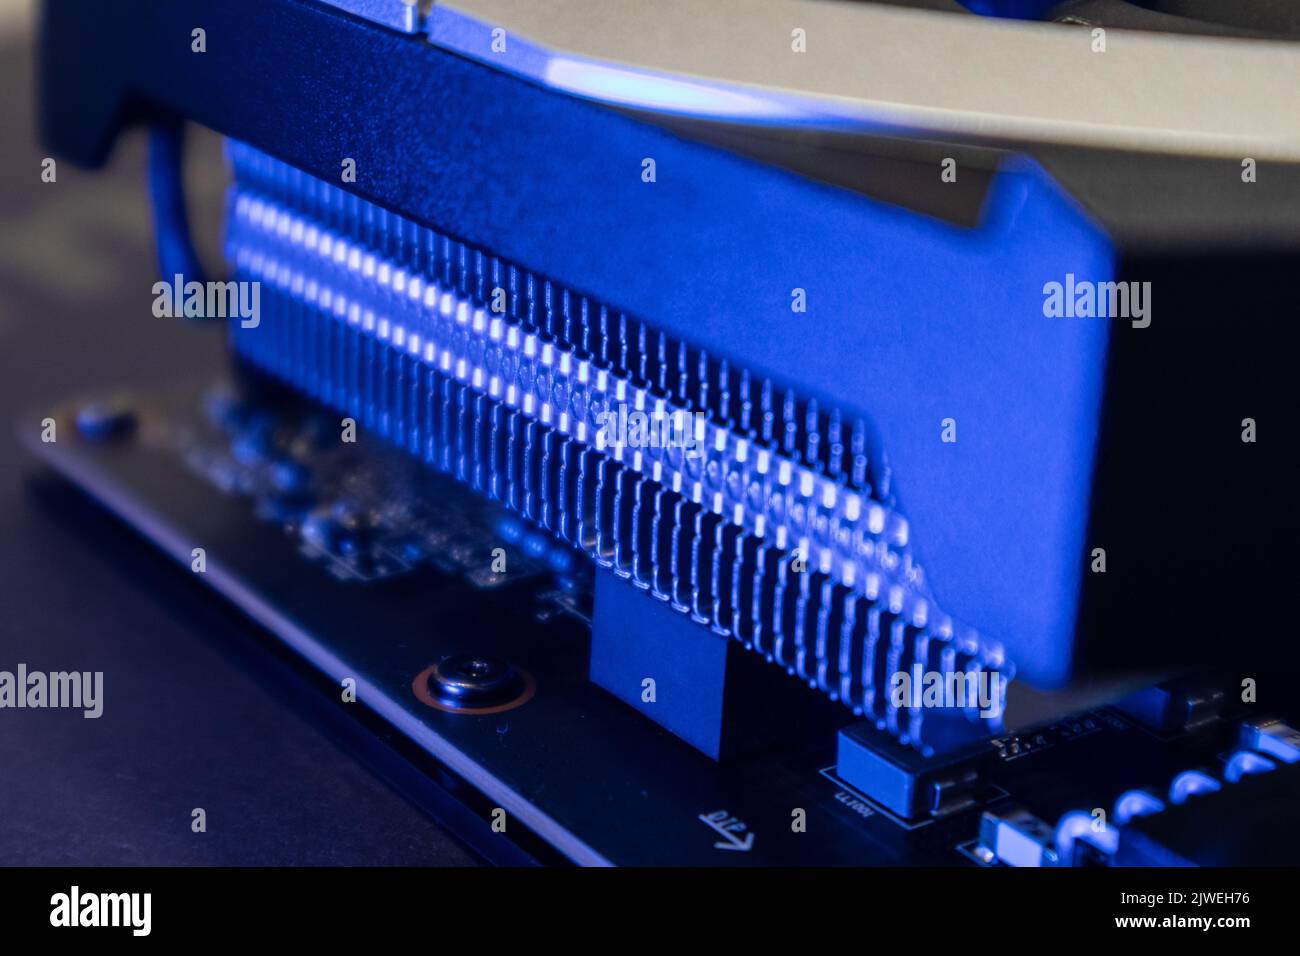 Gpu graphics or video card cooling system close-up in blue light with blur, PC hardware electronics details. Components from powerful computer for gam Stock Photo